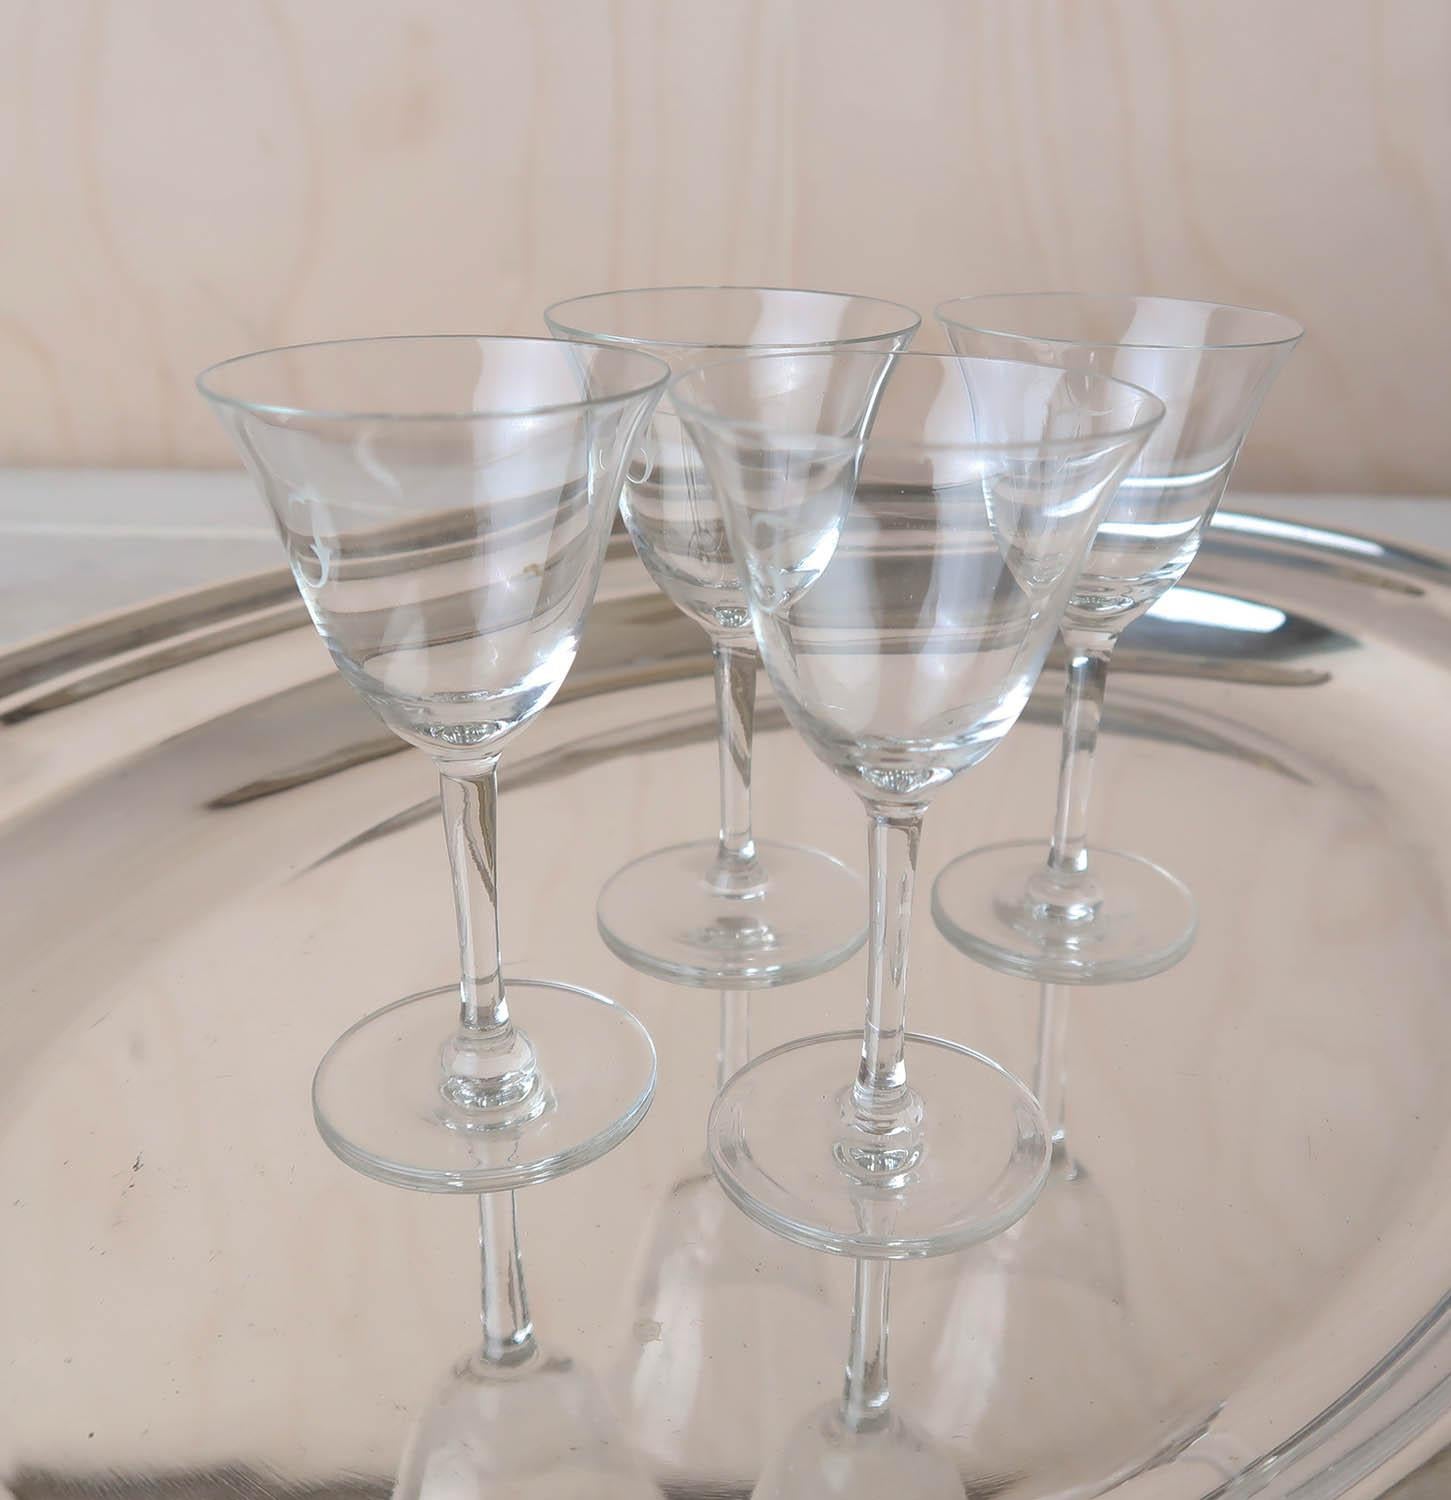 Edwardian Set of 4 Small Glasses Engraved with Initial 